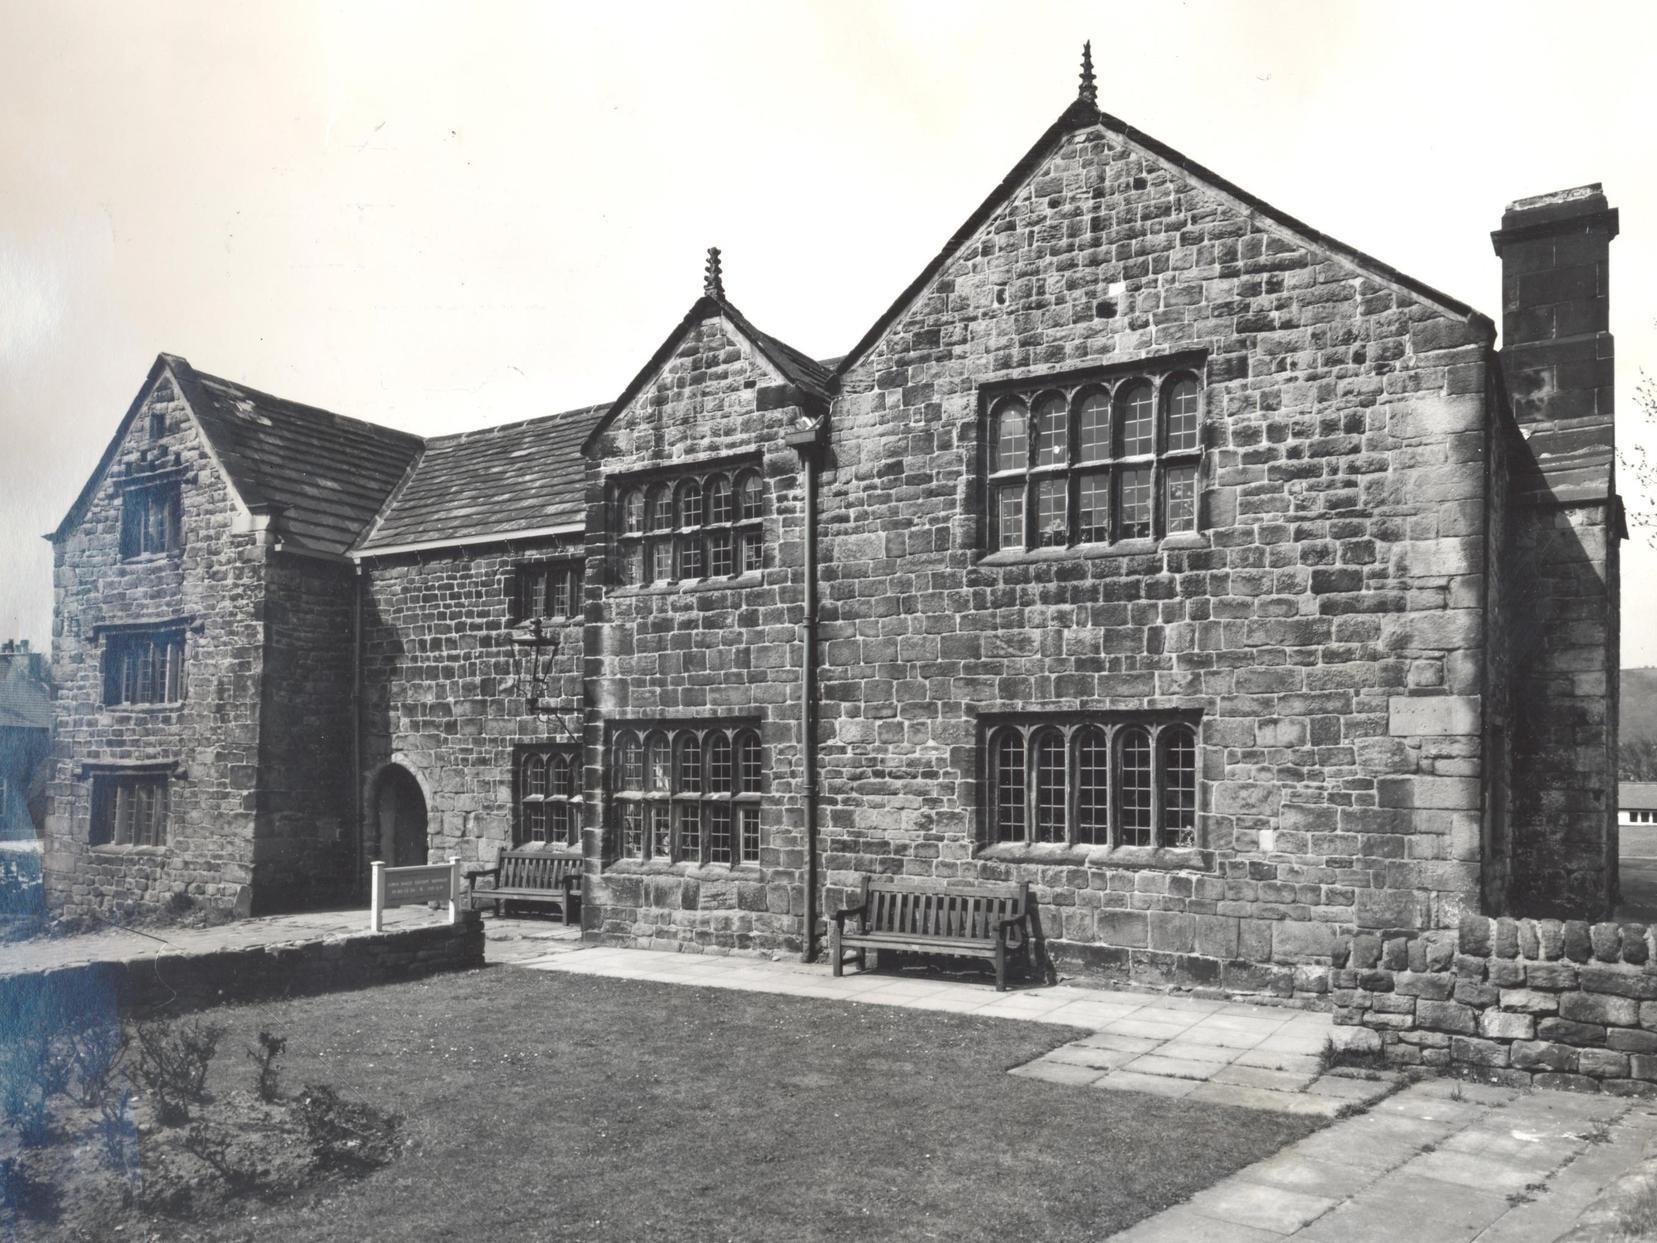 This is the Manor House in Ilkley at the end of the 1970s.